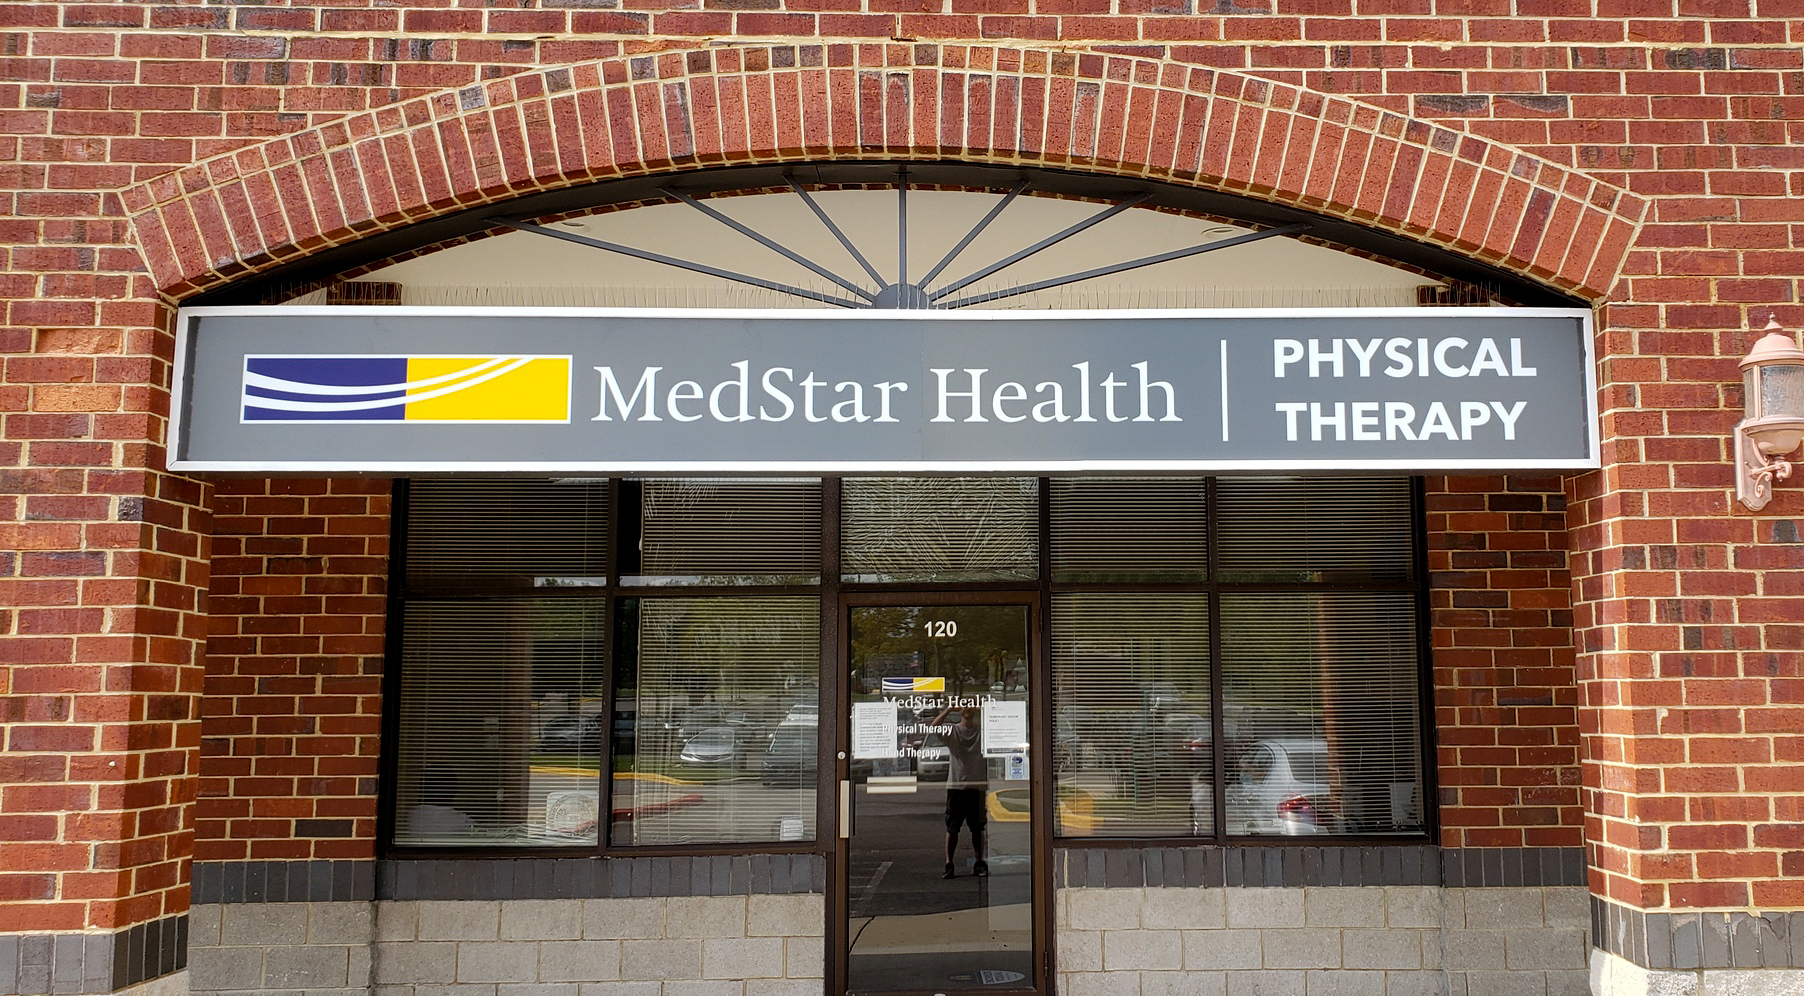 Exterior of the Westfield office building where MedStar Physical Therapy is located.